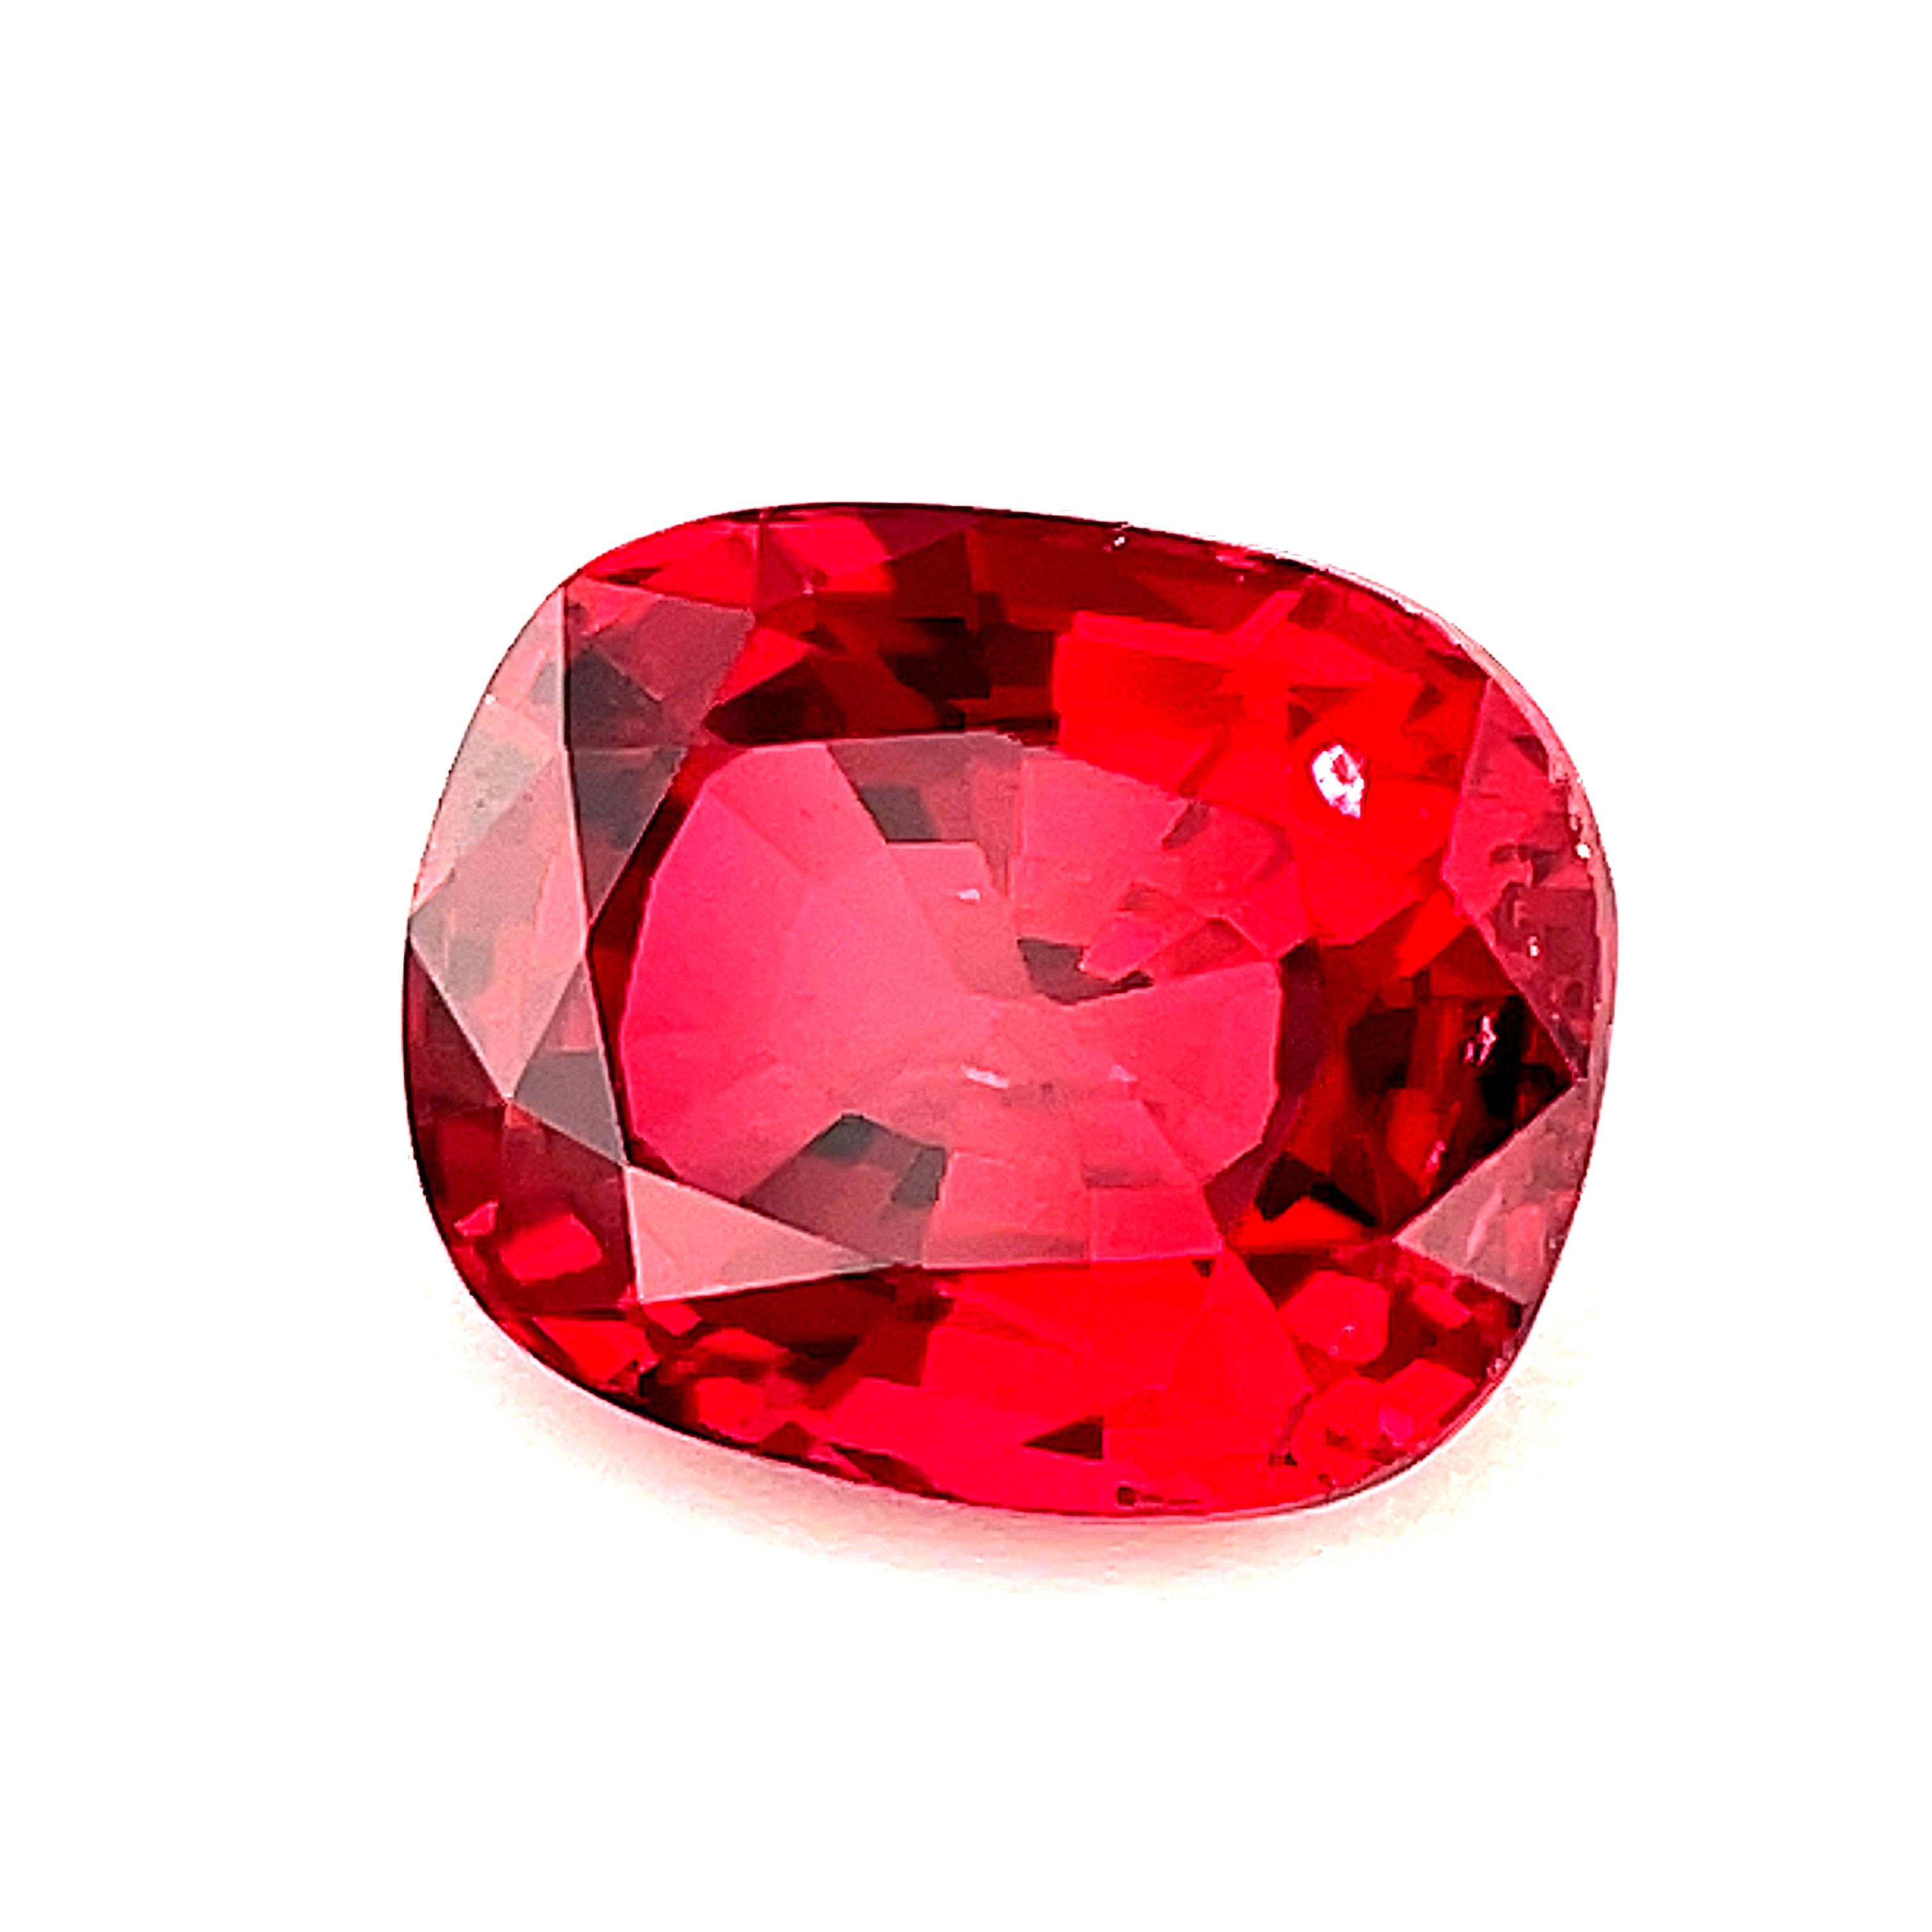 If you are looking for a superb, fine-quality red spinel, look no further than this lovely gem! Petite and absolutely stunning, this cushion-shaped spinel weighs .85 carat and measures 5.92 x.4.80 millimeters. It has gorgeous pure red color,